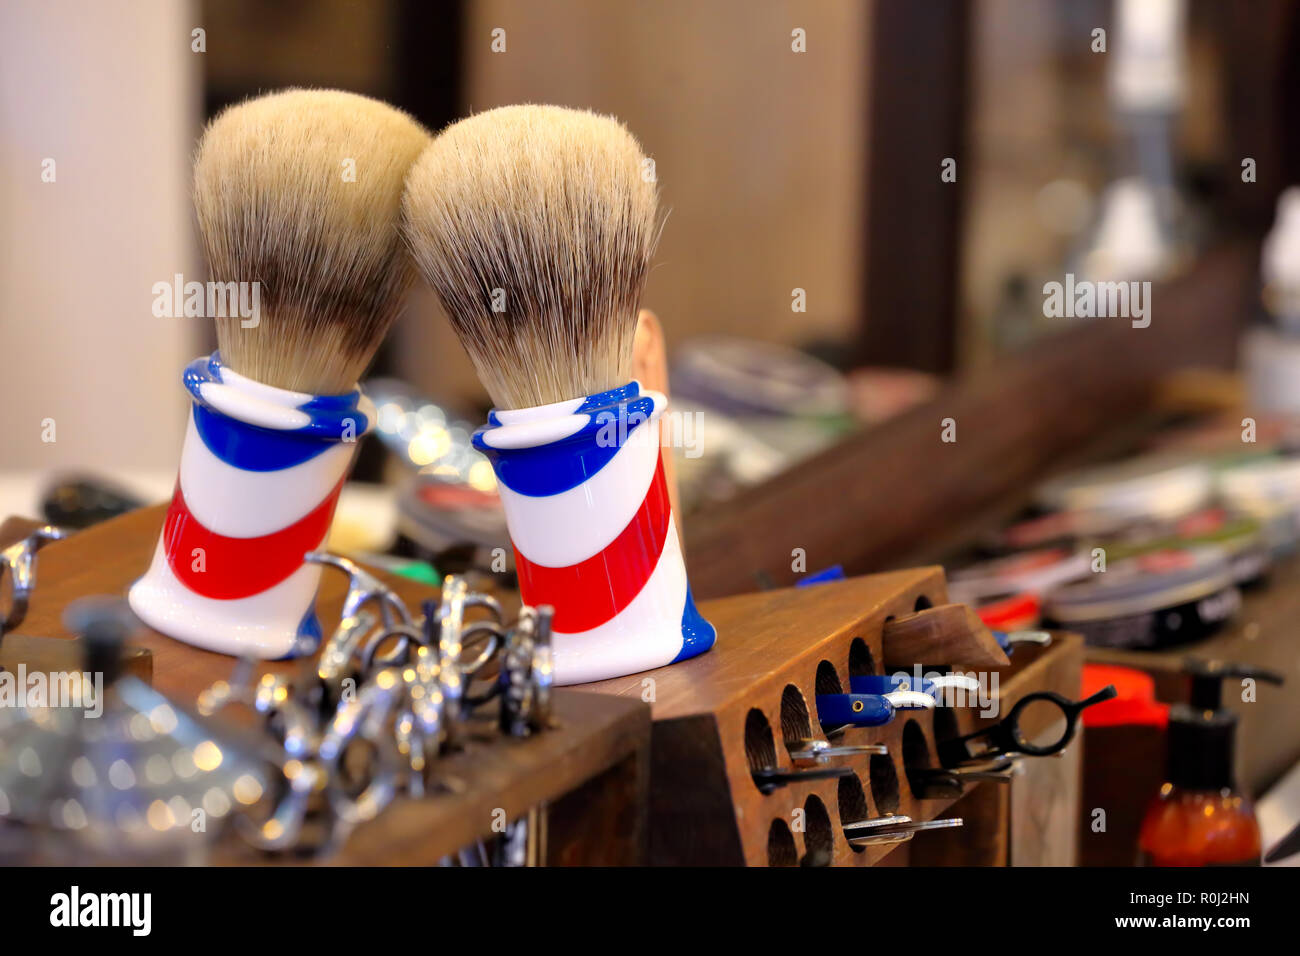 Shaving accessories in barber shop and empty space for text Stock Photo